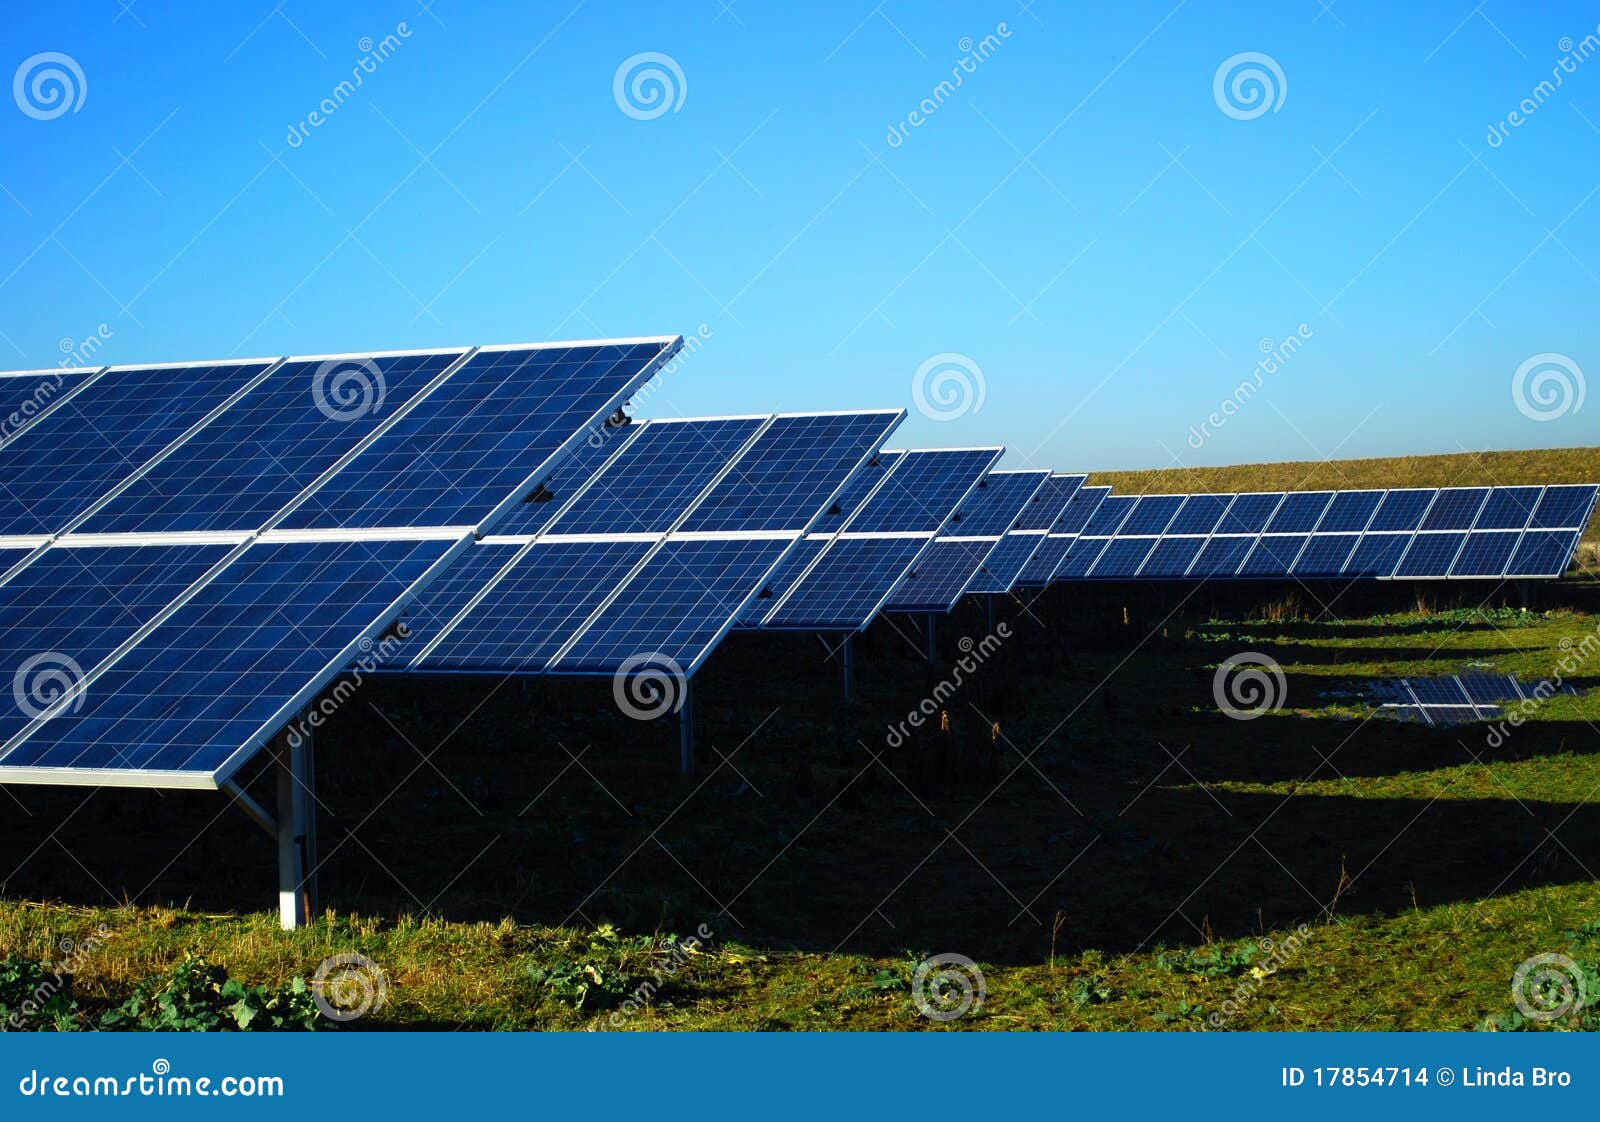 Stock Images: Solar power plant